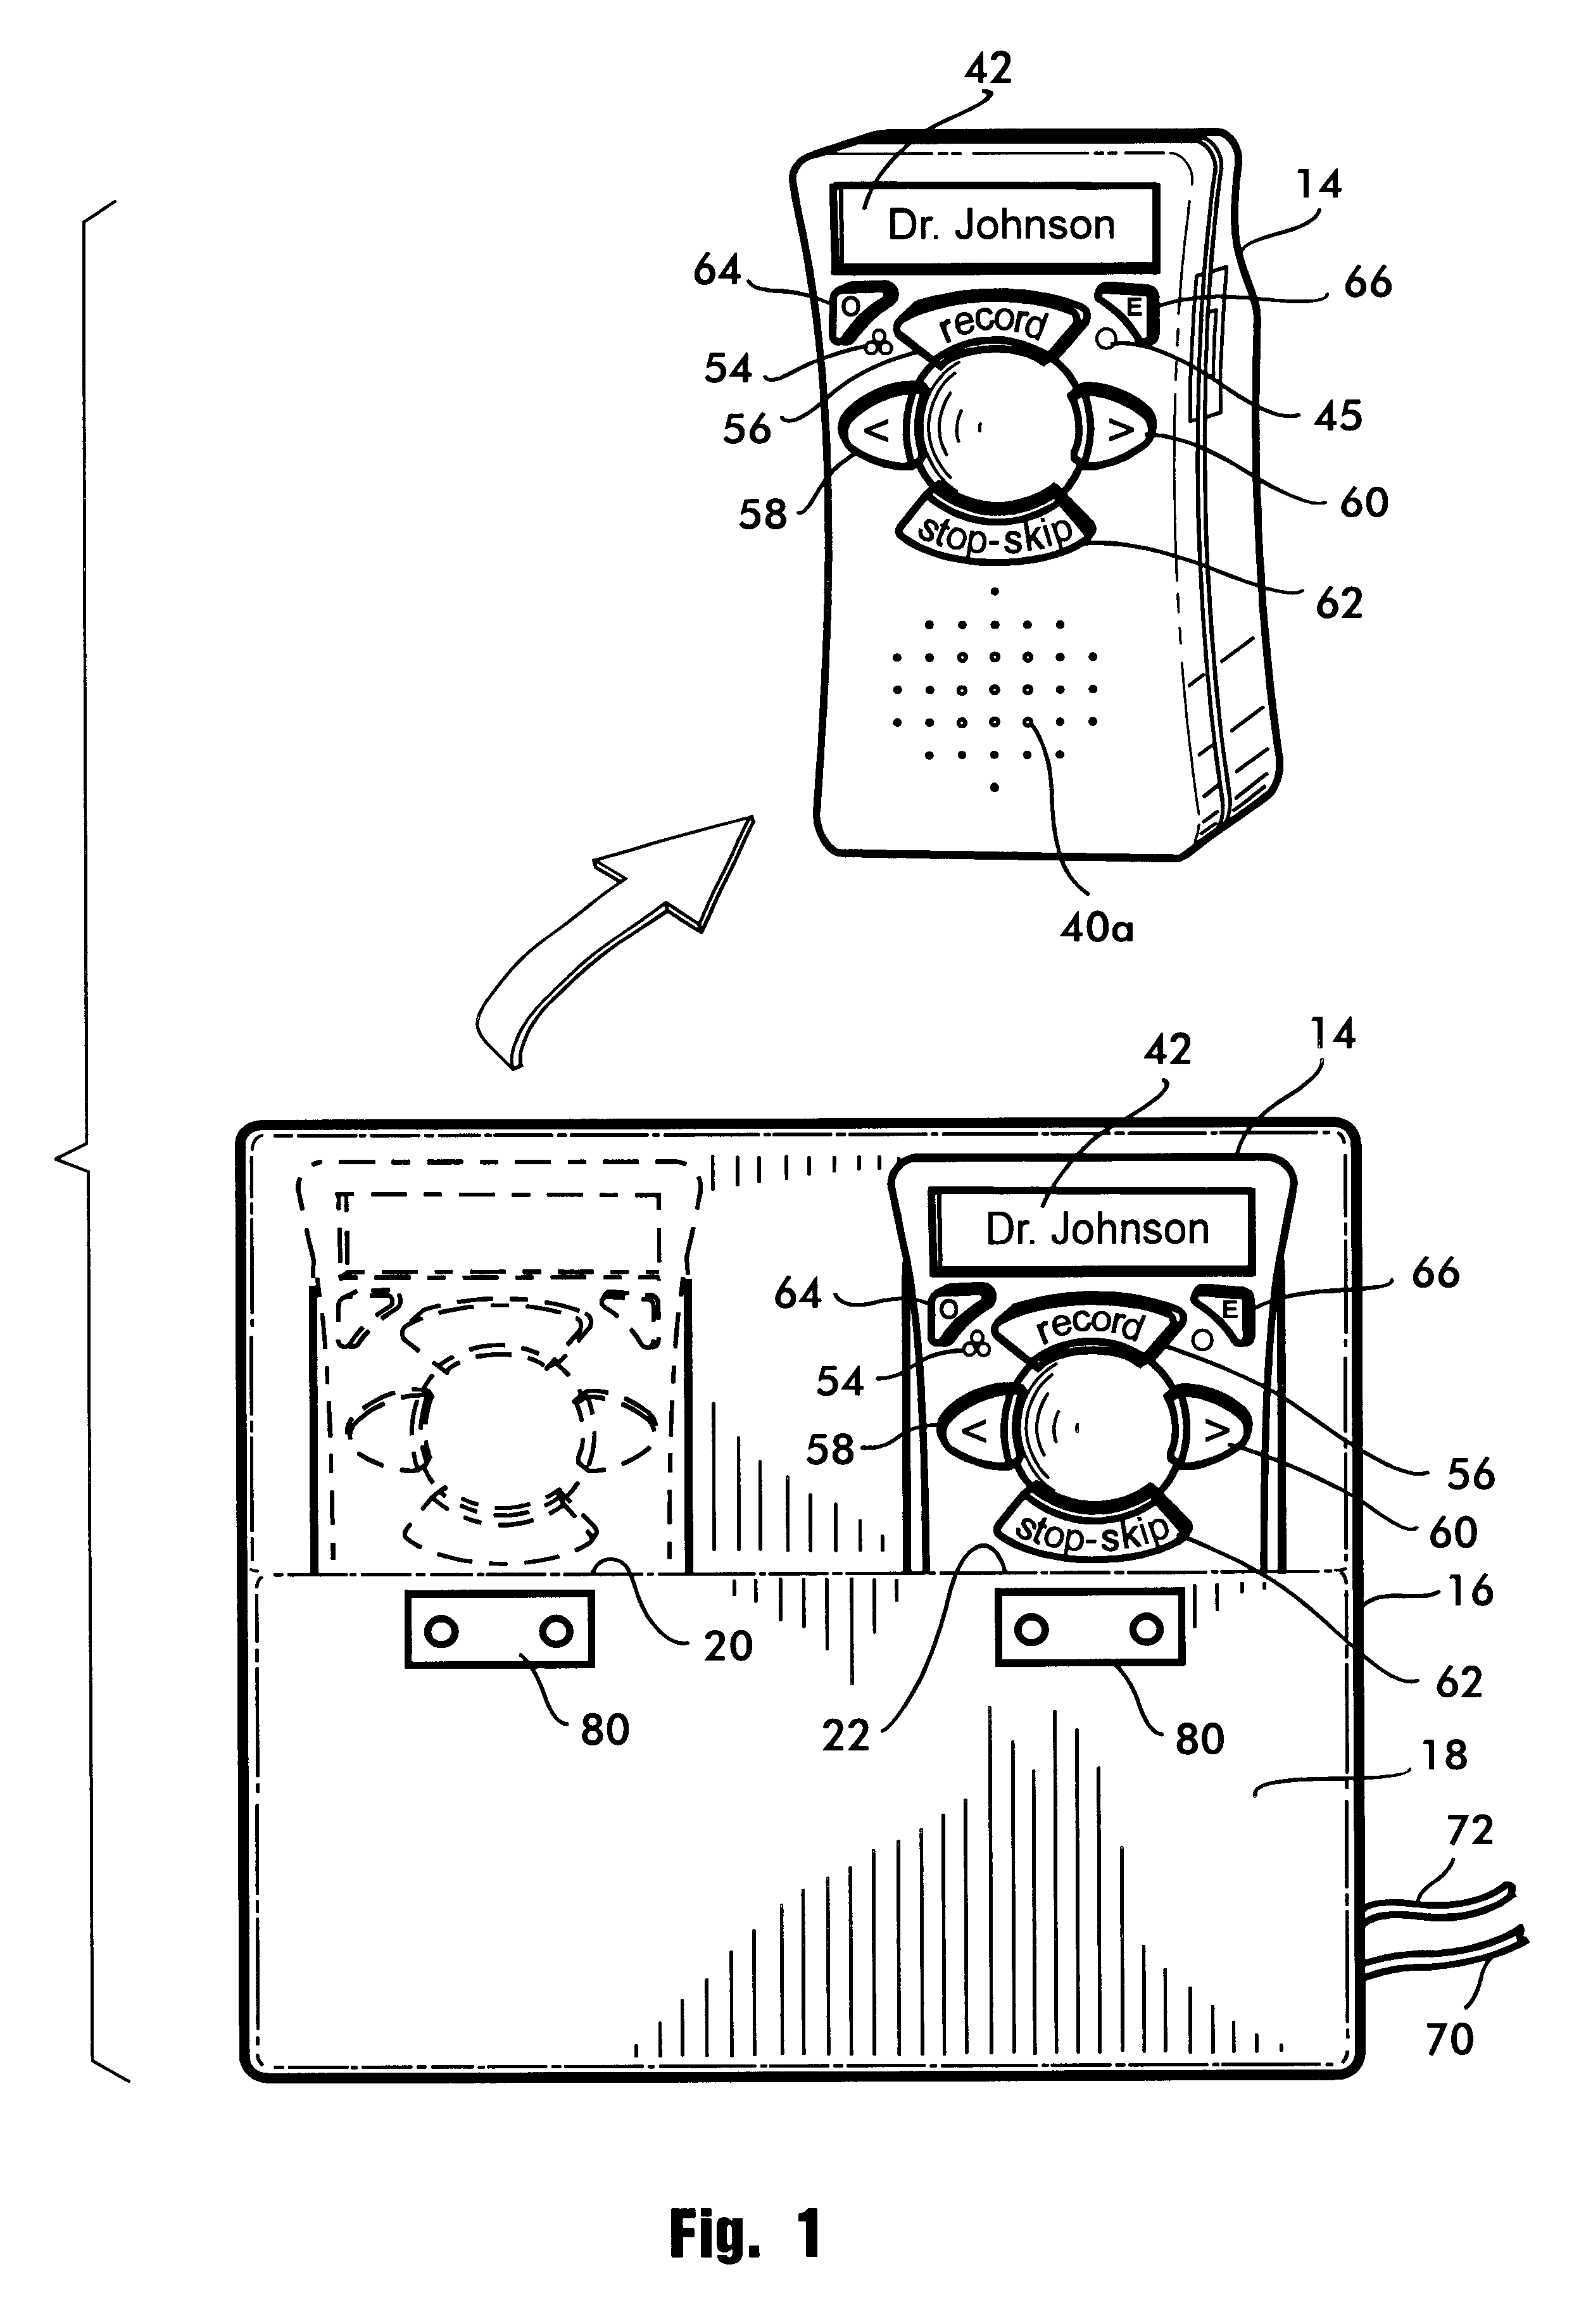 Dictation system capable of processing audio information at a remote location